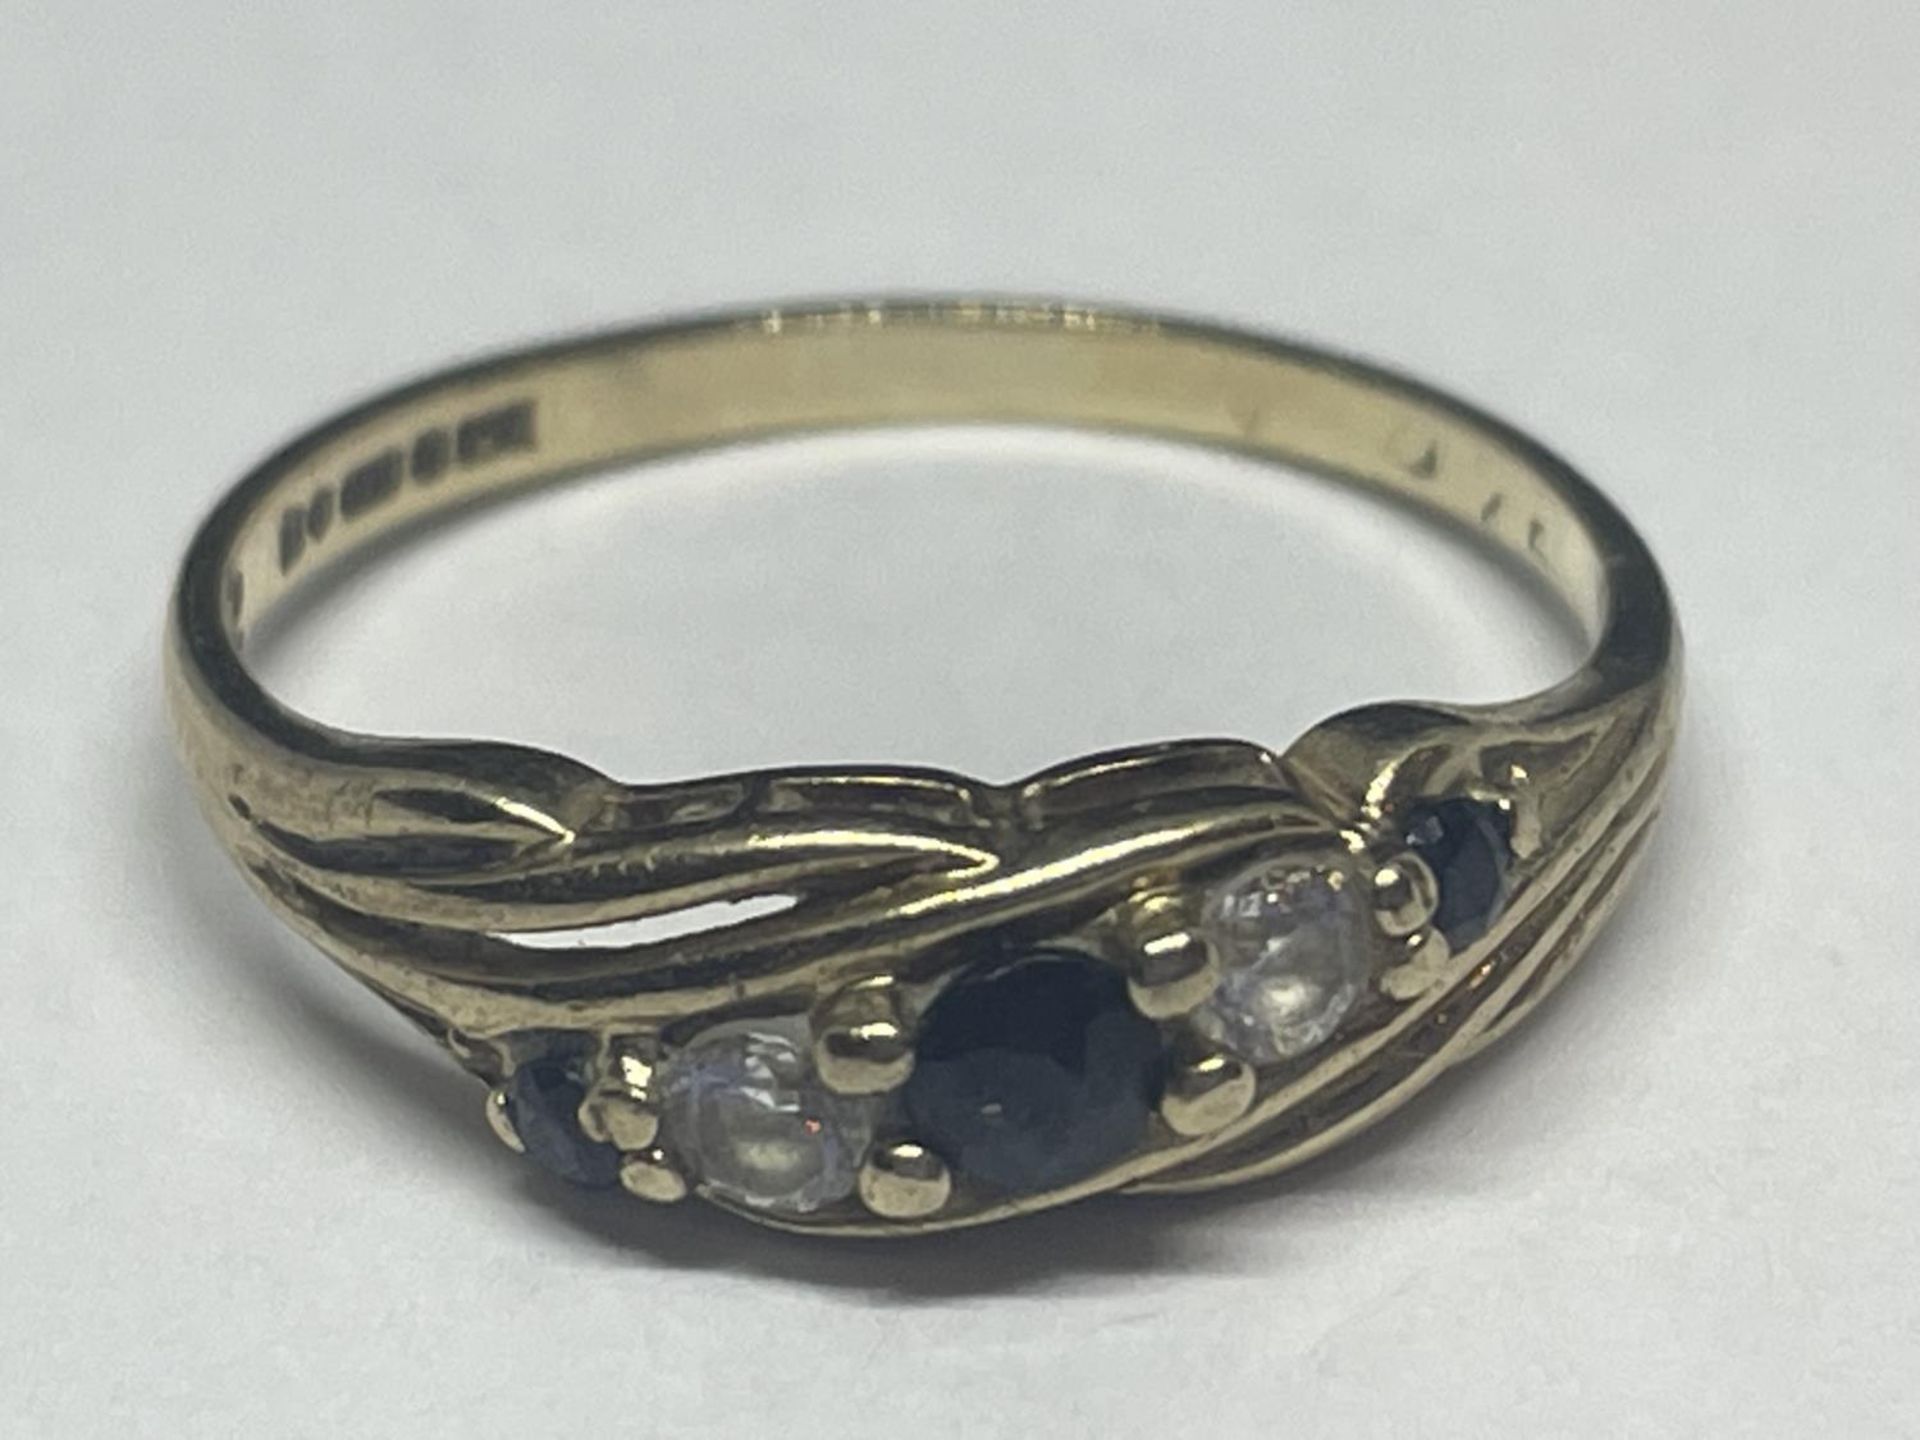 A 9 CARAT GOLD RING WITH THREE SAPPHIRES AND TWO CUBIC ZIRCONIAS ON A TWIST DESIGN SIZE M/N